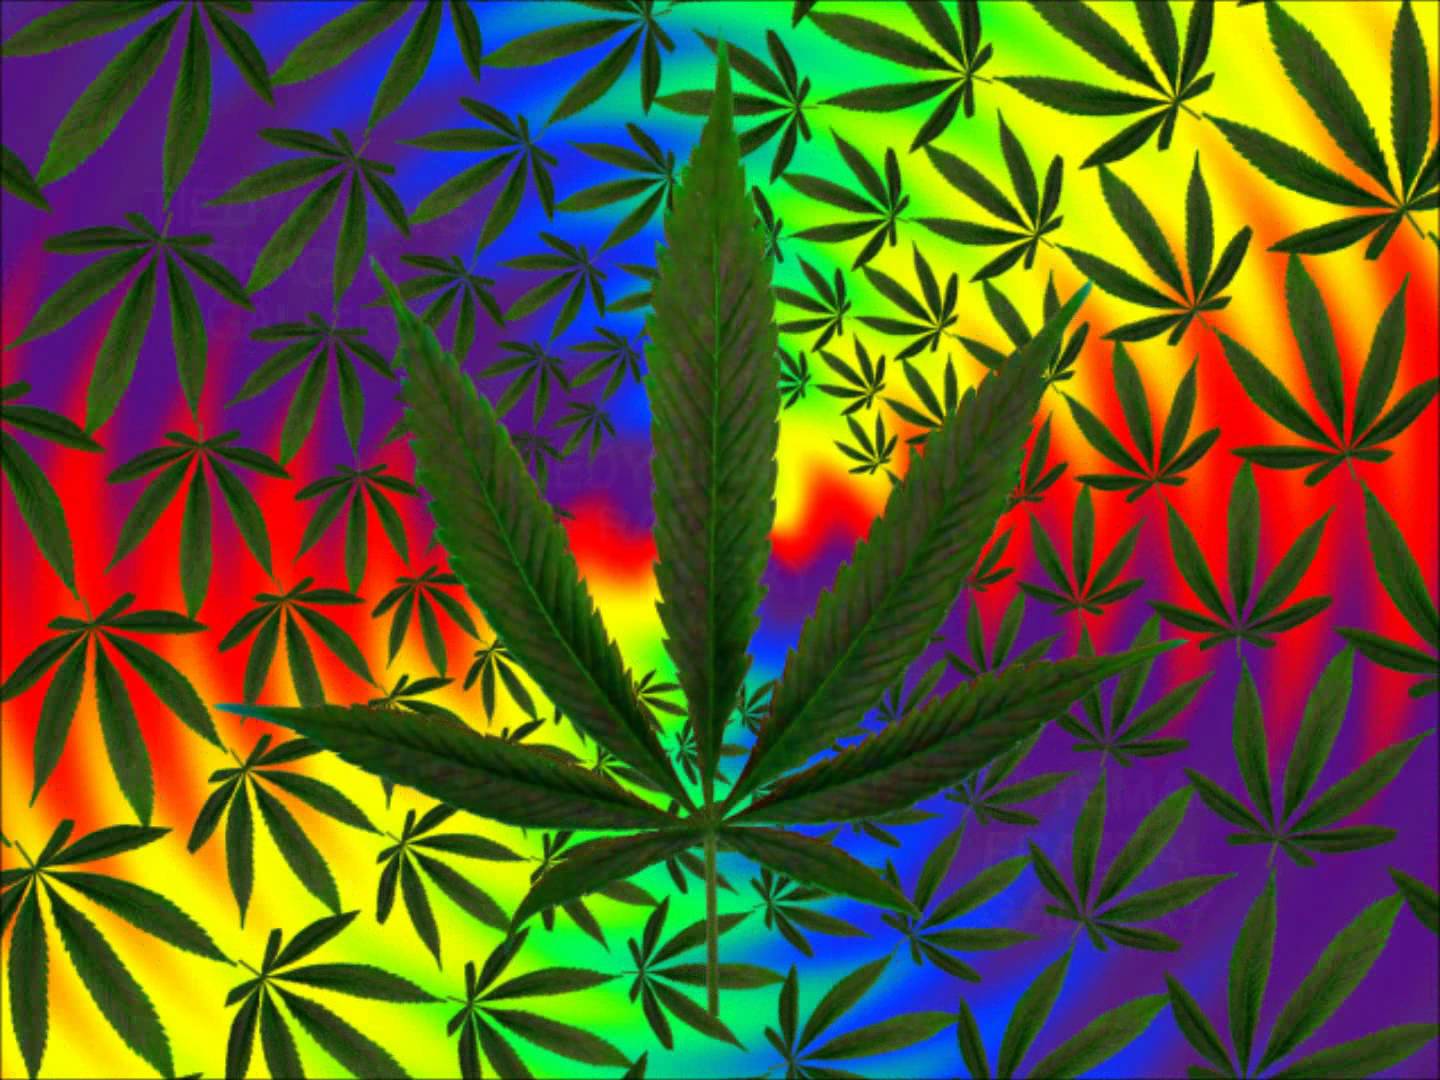 Trippy Pot Leaf, Hd Wallpapers & backgrounds Download.